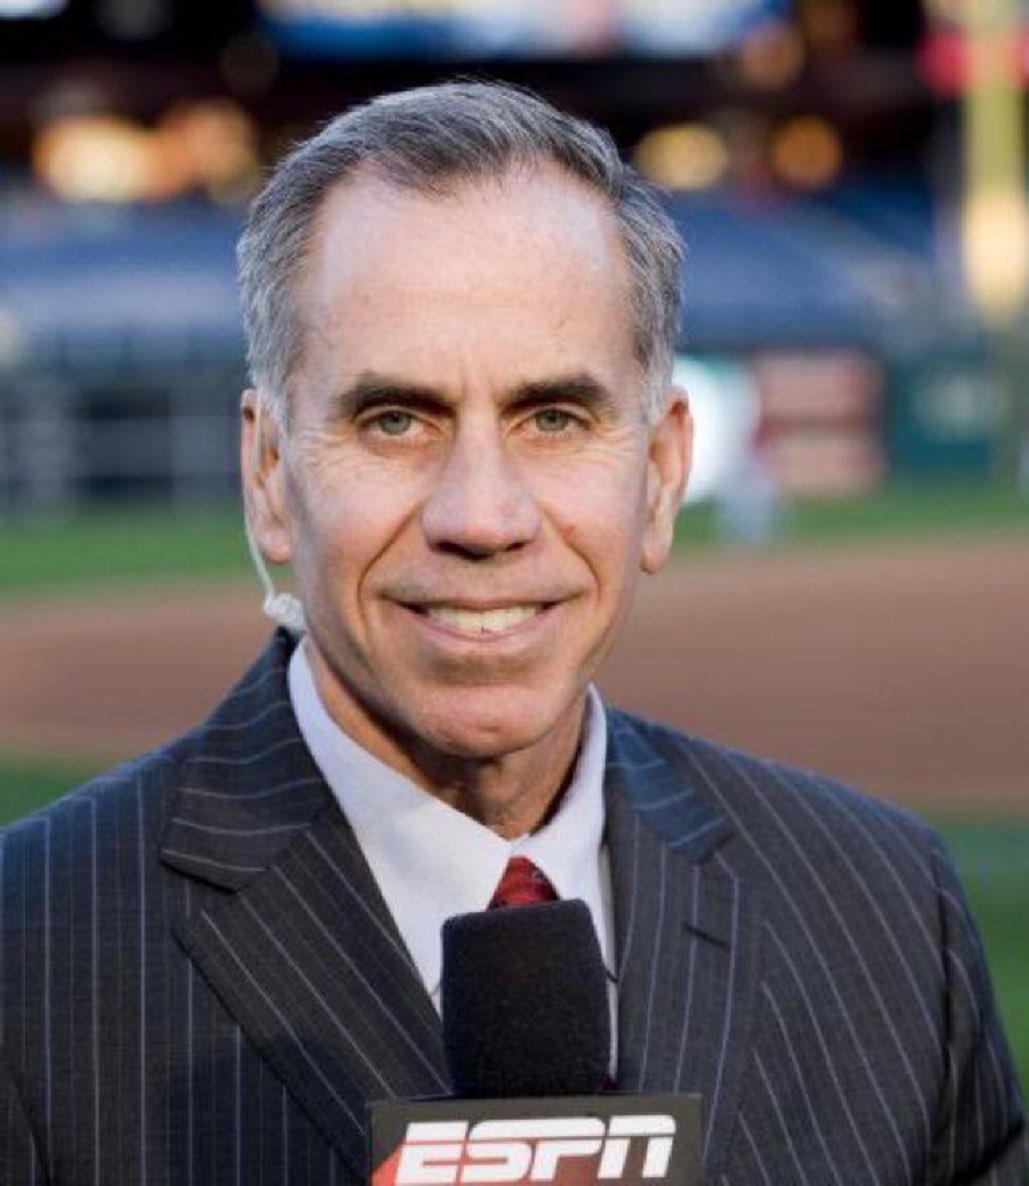 Enjoy playing baseball for as long as you can. Because once it's over, you'll miss it. Trust me. -Tim Kurkjian